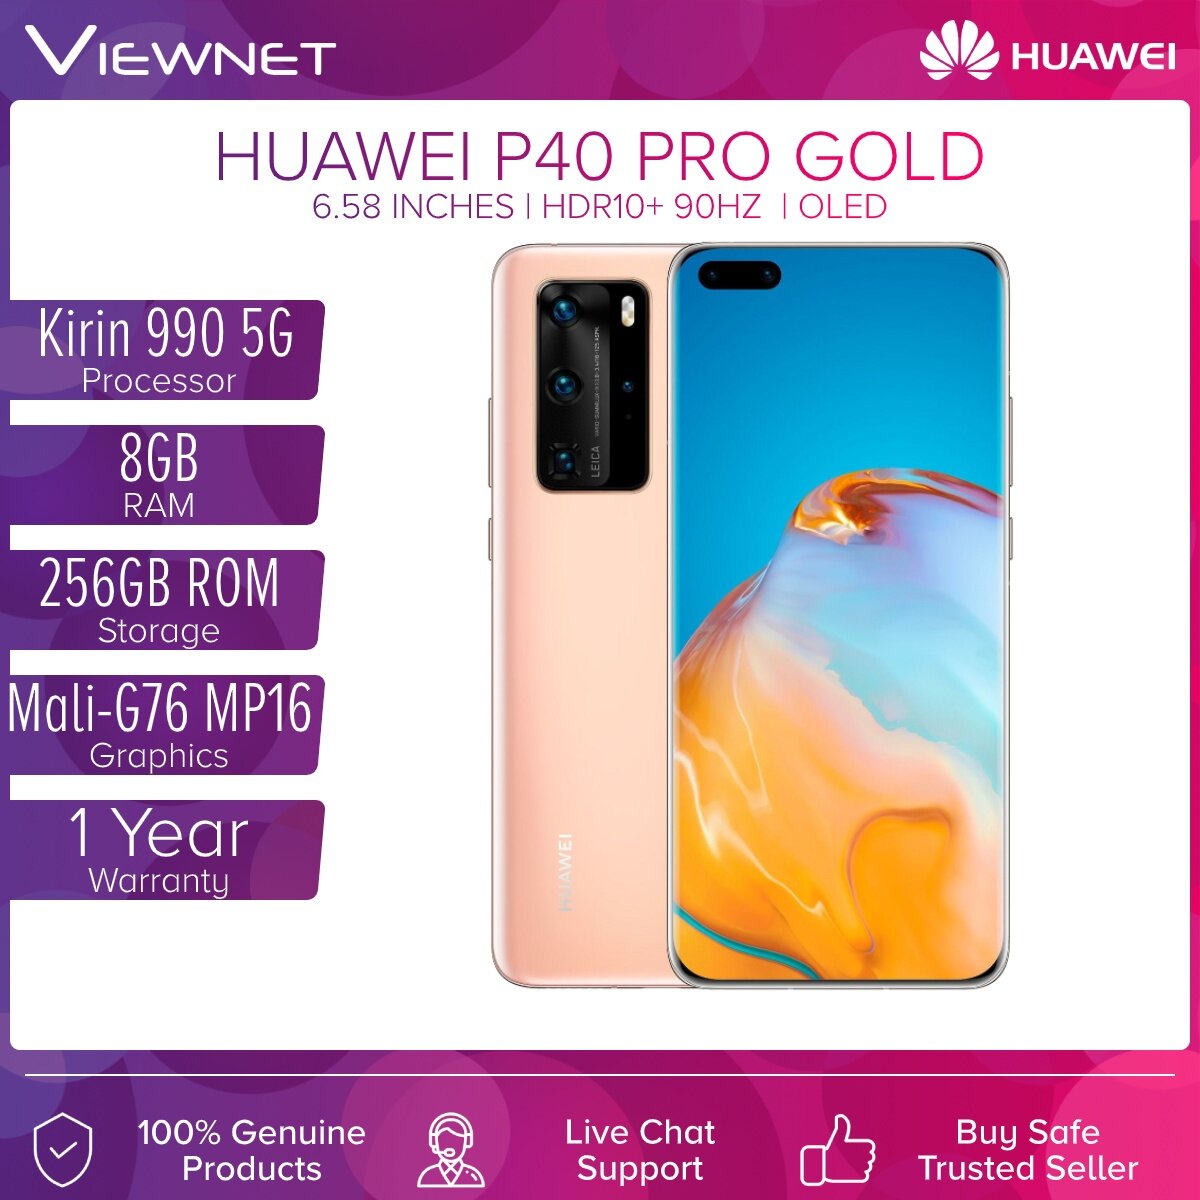 Huawei P40 Pro 5G Smartphone 8GB RAM + 256GB ROM Visionary Photography (Blue,Silver,Gold)